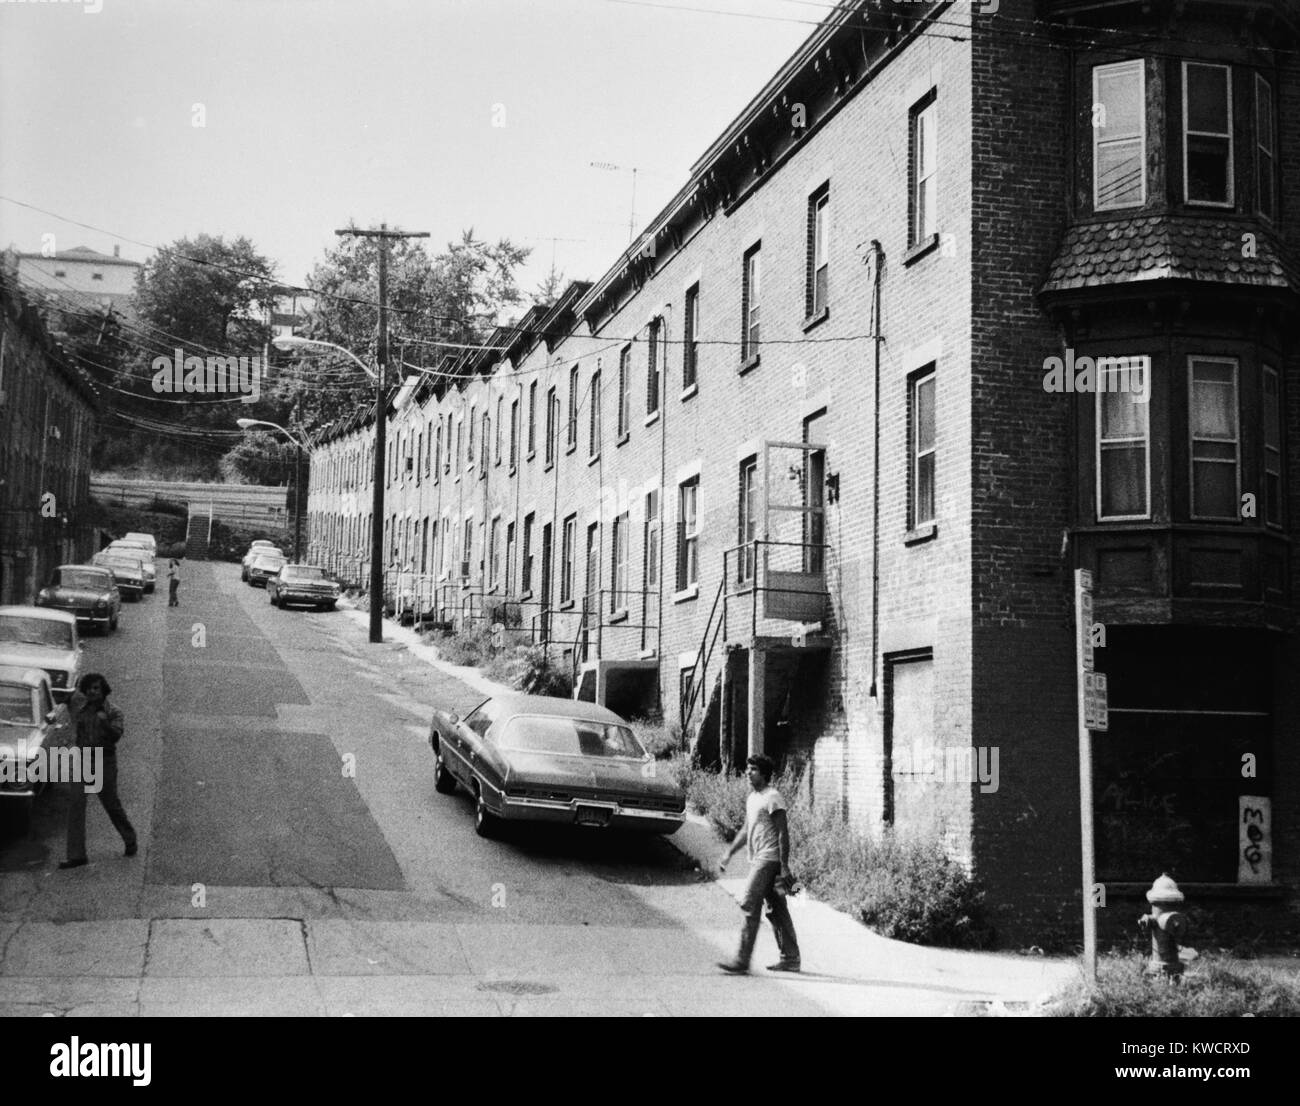 Yonkers, New York, ca. 1980. Moquette Row Housing, built in the 1880s, with each individual house, approximately 17 - 20 feet wide. Row North and South, view west showing front elevation with original end structures. Westchester County, NY. (BSLOC 2015 11 11) Stock Photo